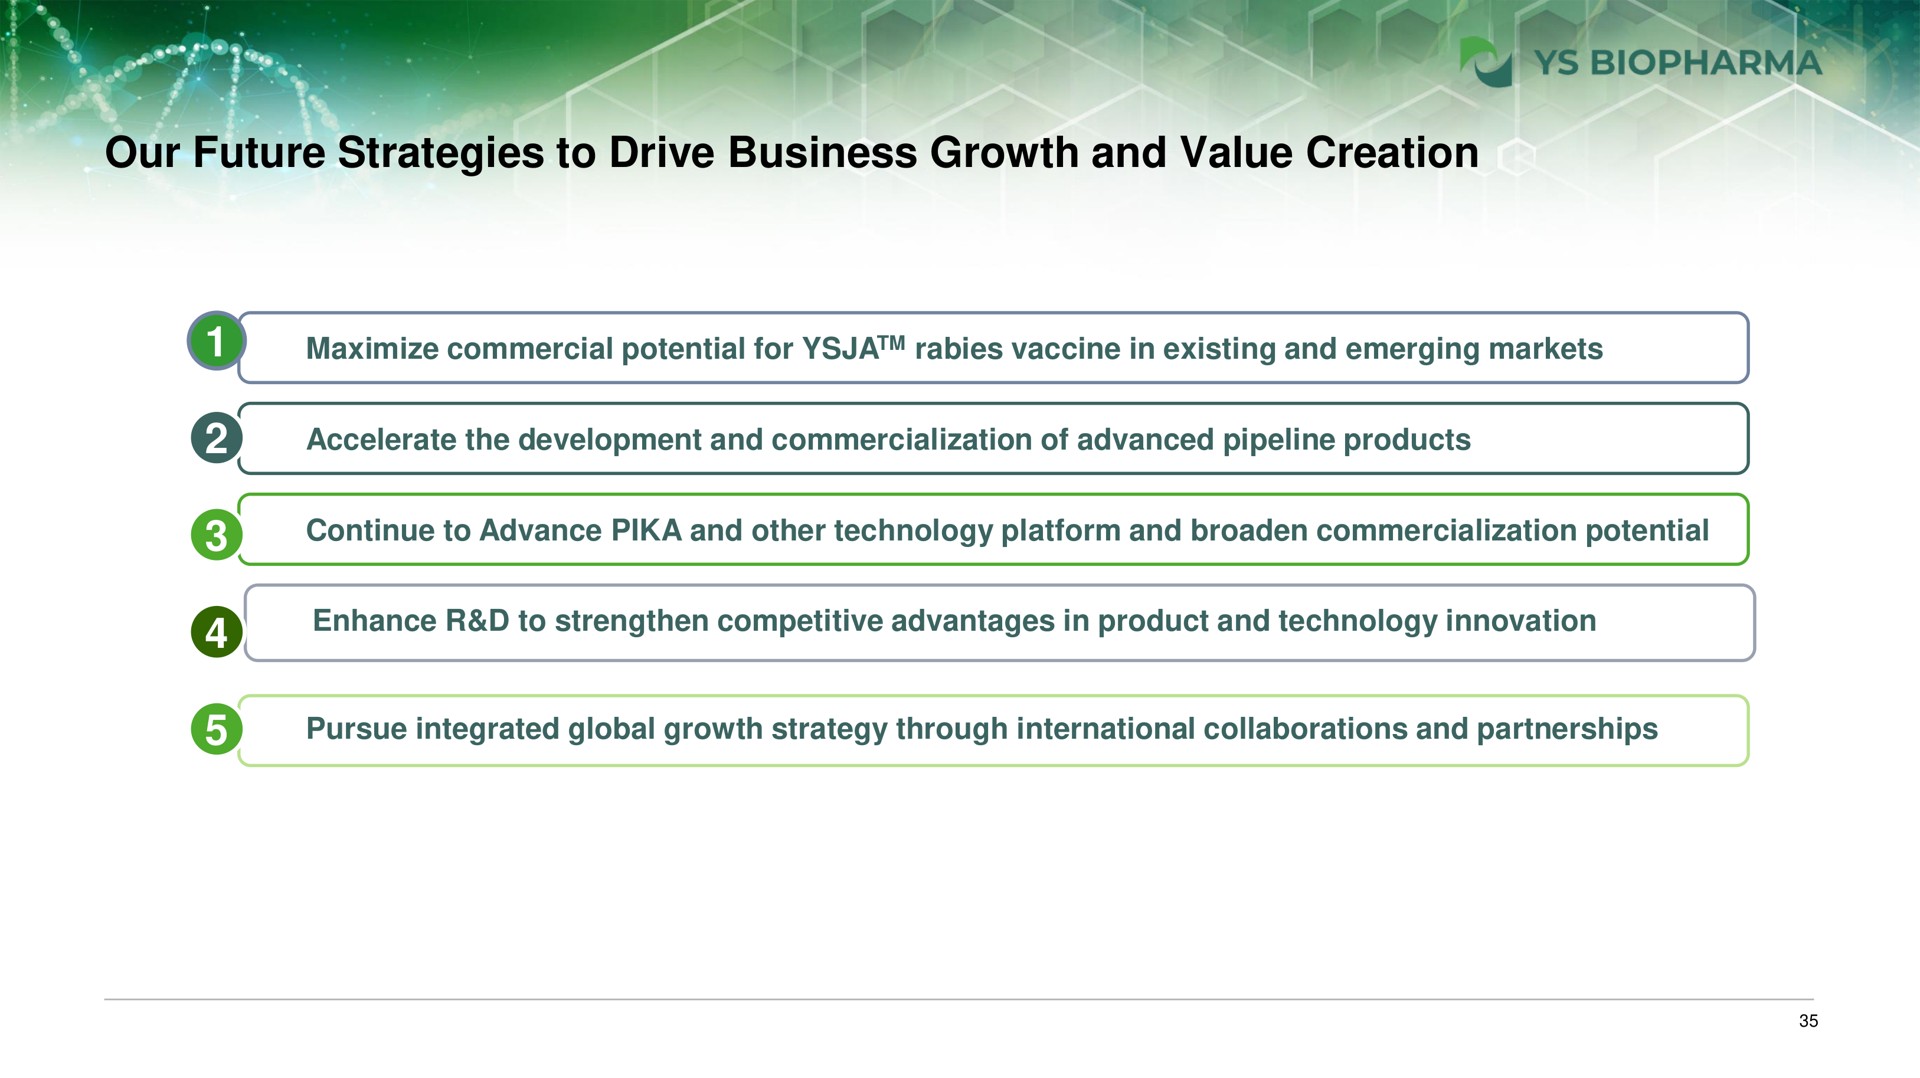 our future strategies to drive business growth and value creation | YS Biopharma